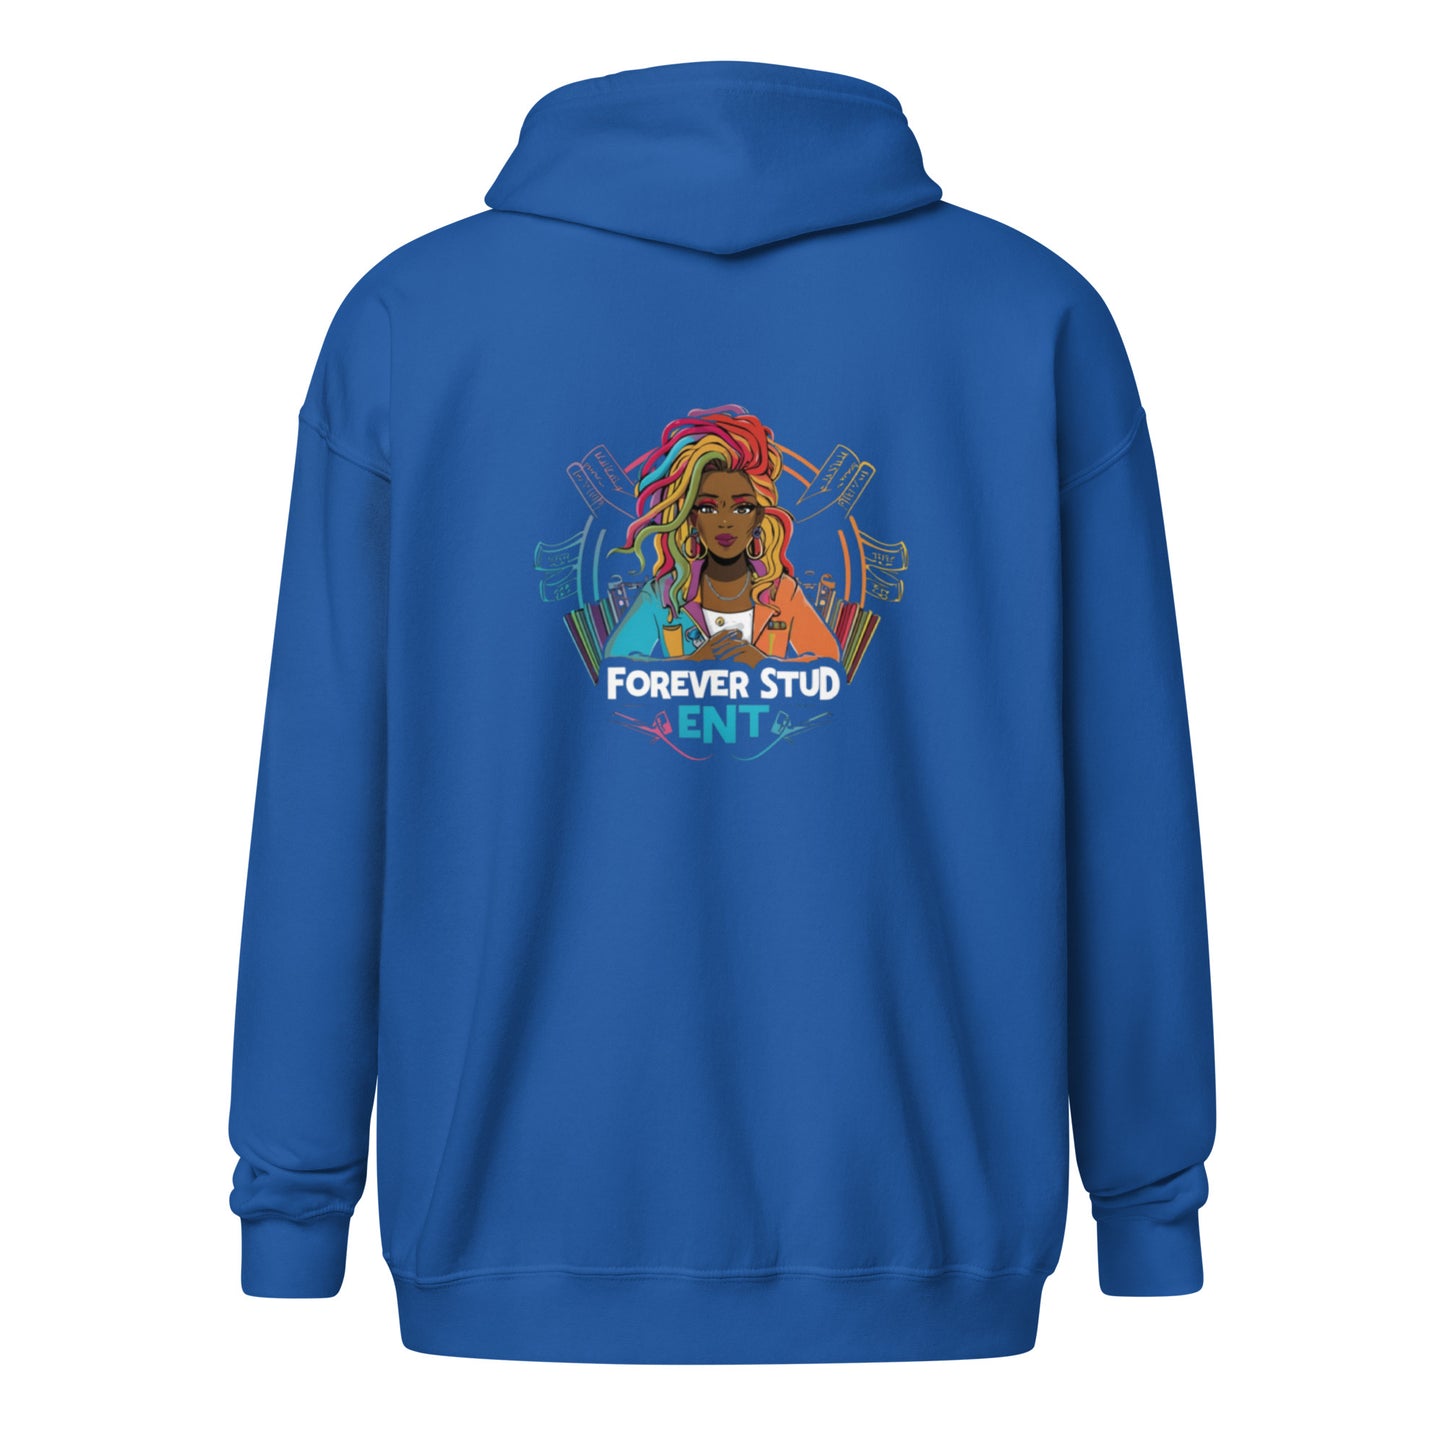 Forever Stud Ent. Zipped Hoodie